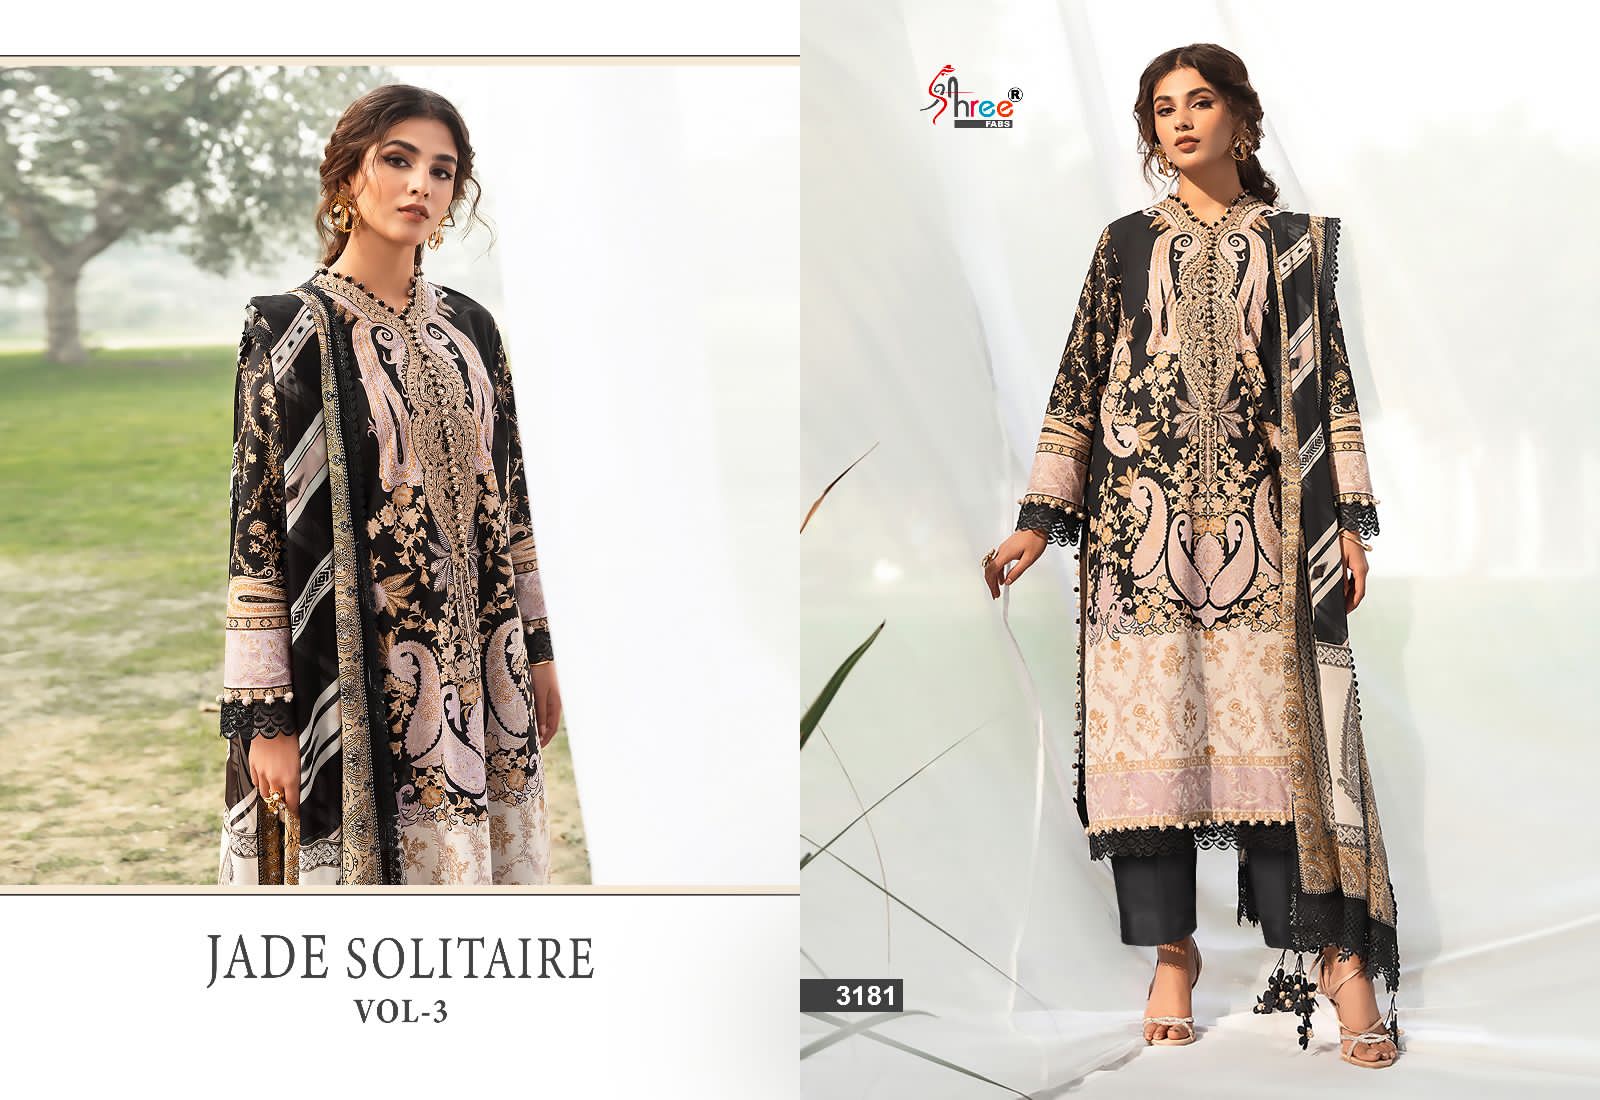 Shree Jade Solitaire Vol 3 collection 4